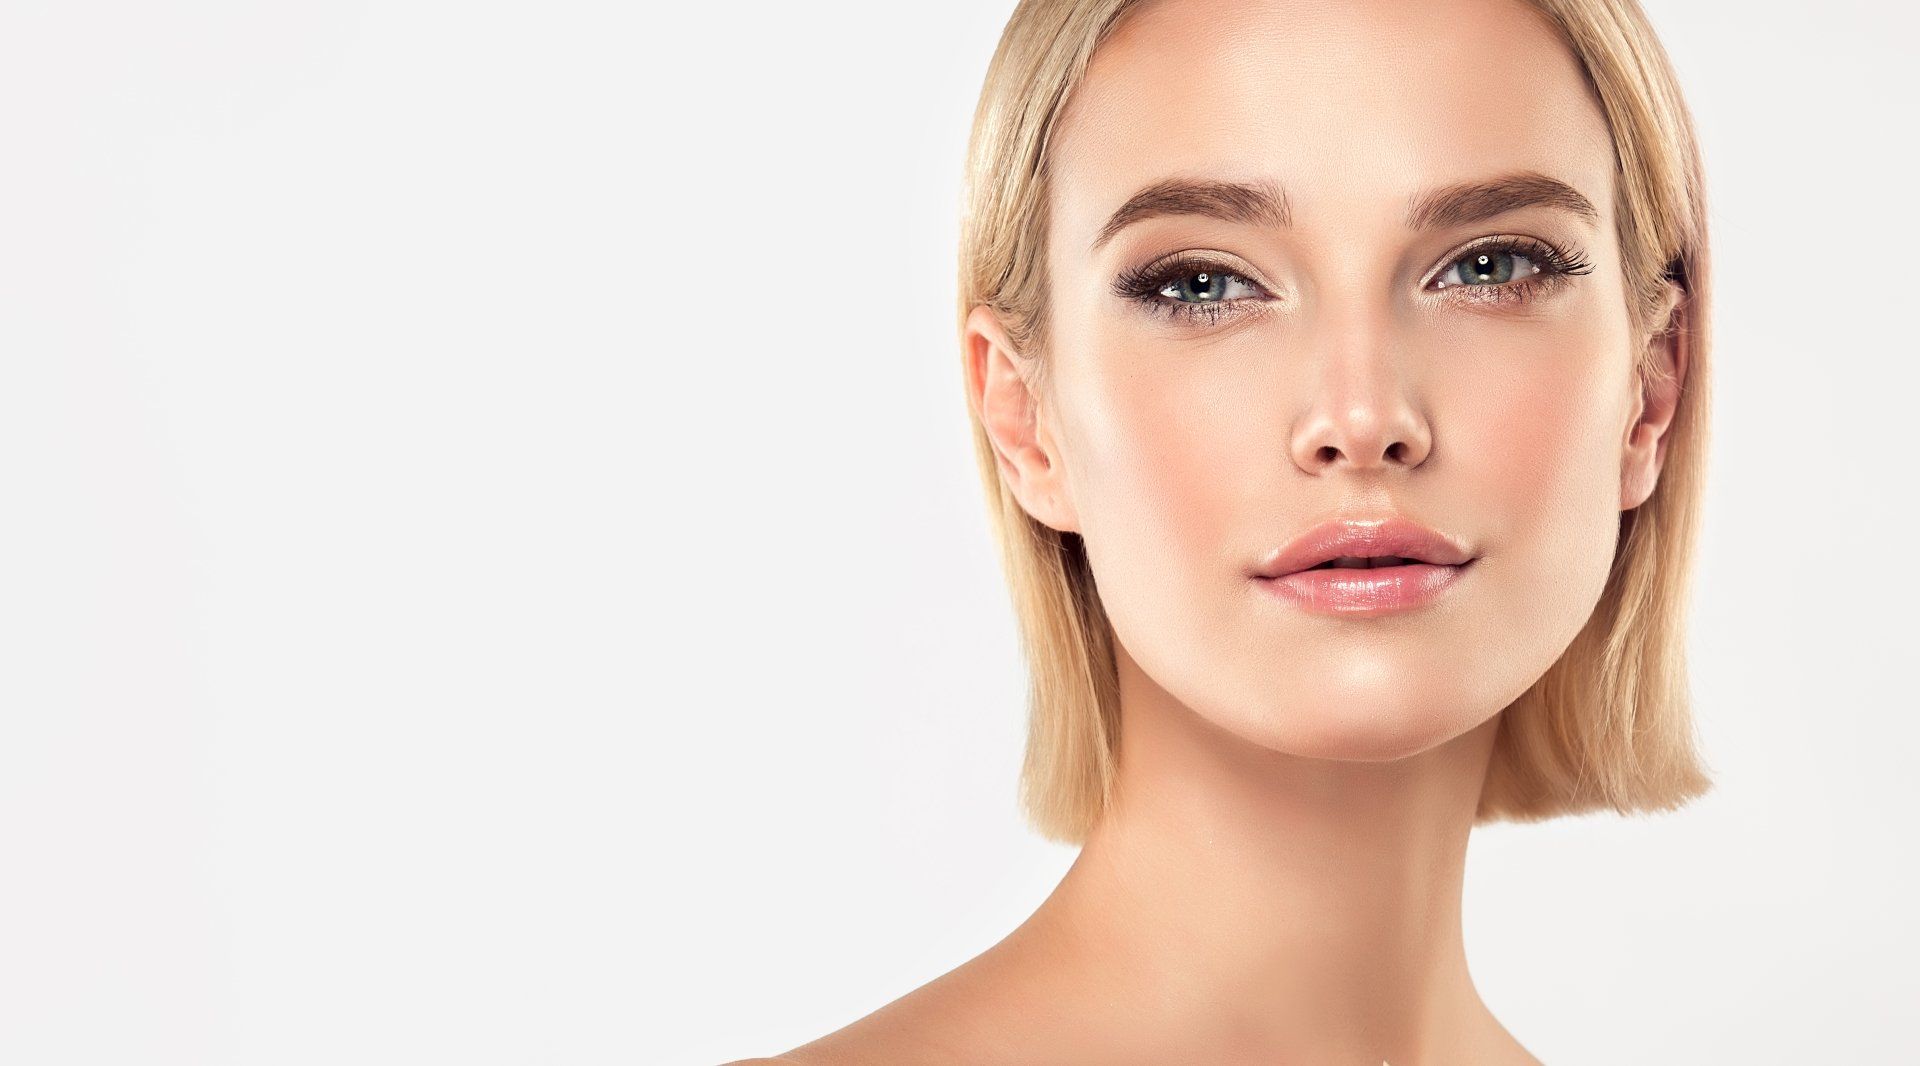 HOW FACIAL FILLERS CAN HELP YOU